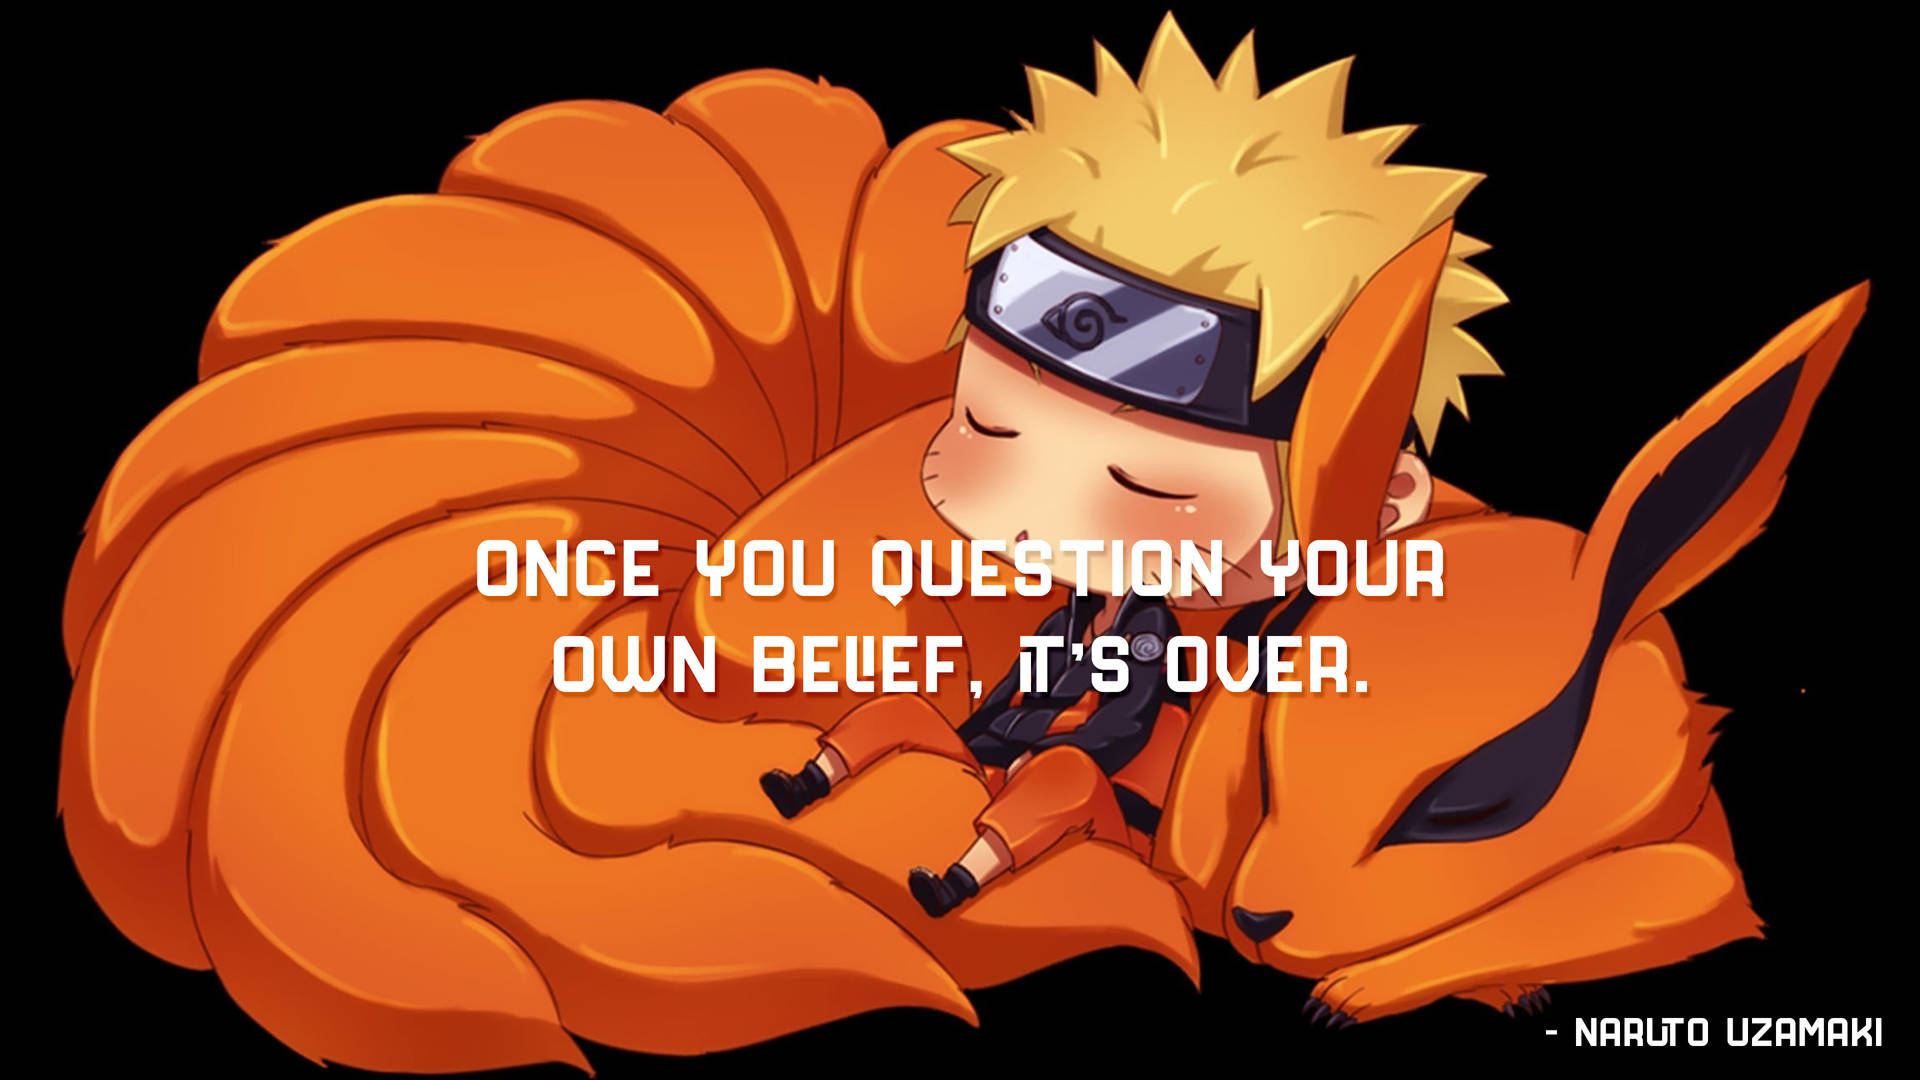 Naruto Quotes Question Your Own Belief